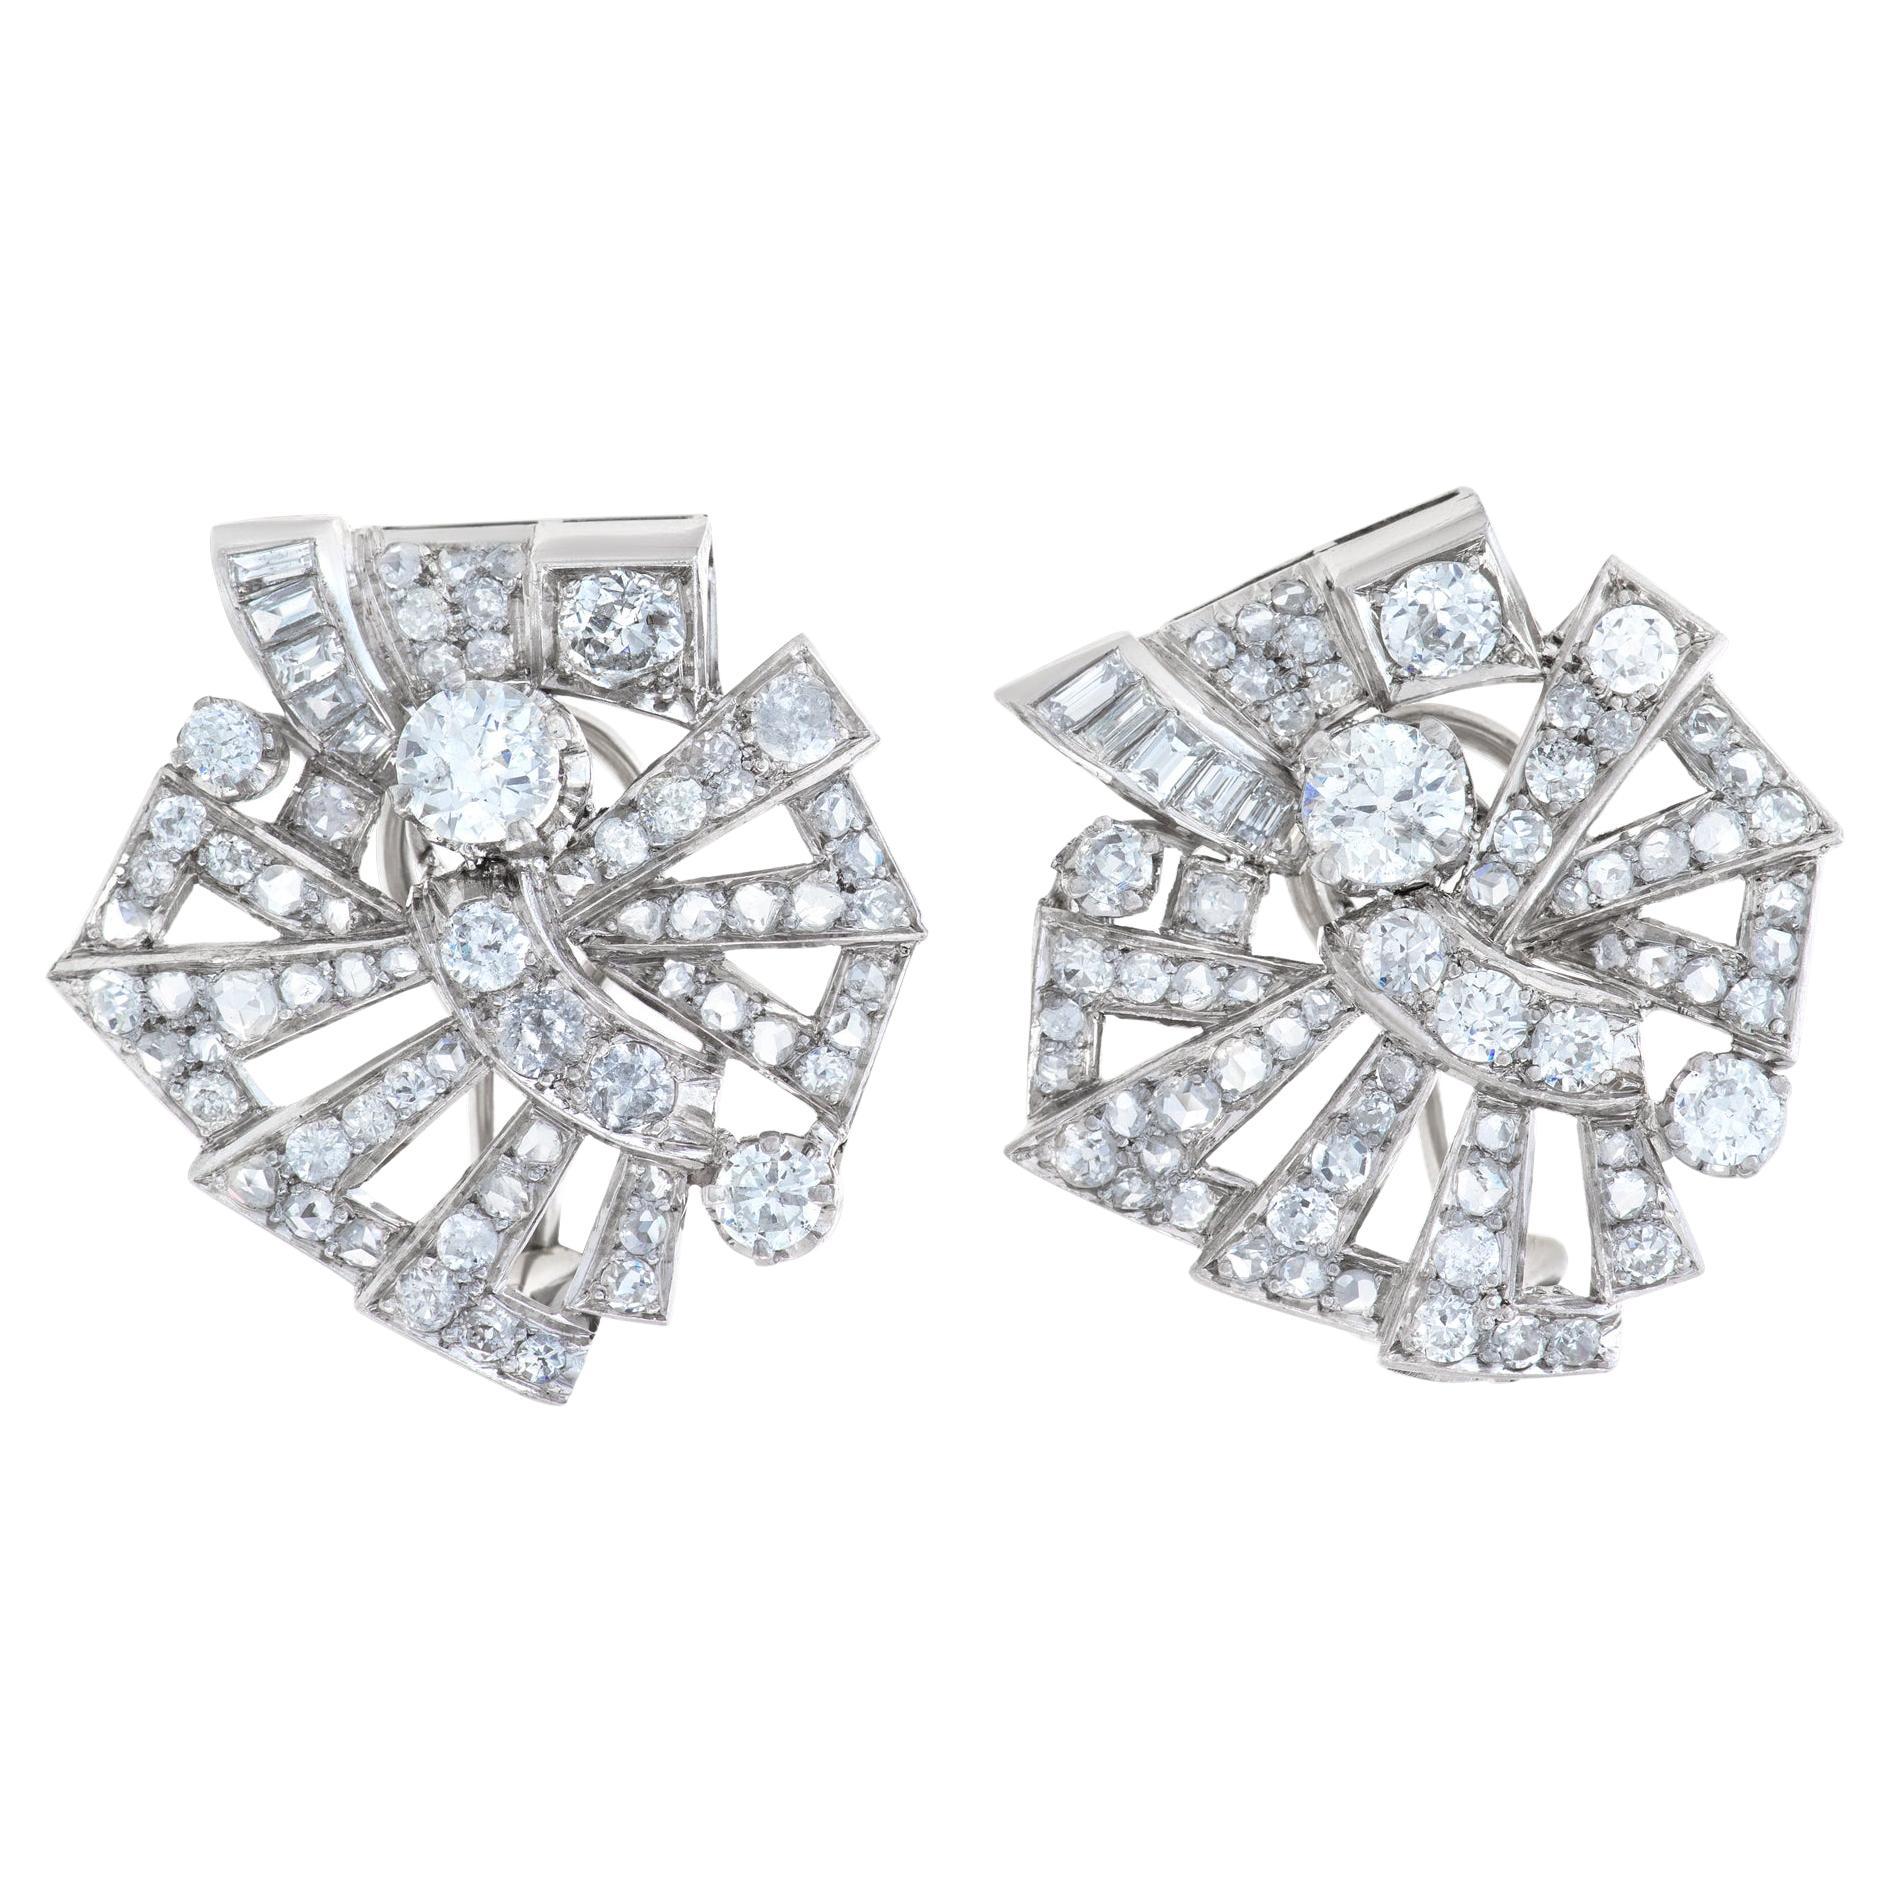 Art Deco Style Earrings With over 5 carats of Diamonds Set In Platinum For Sale